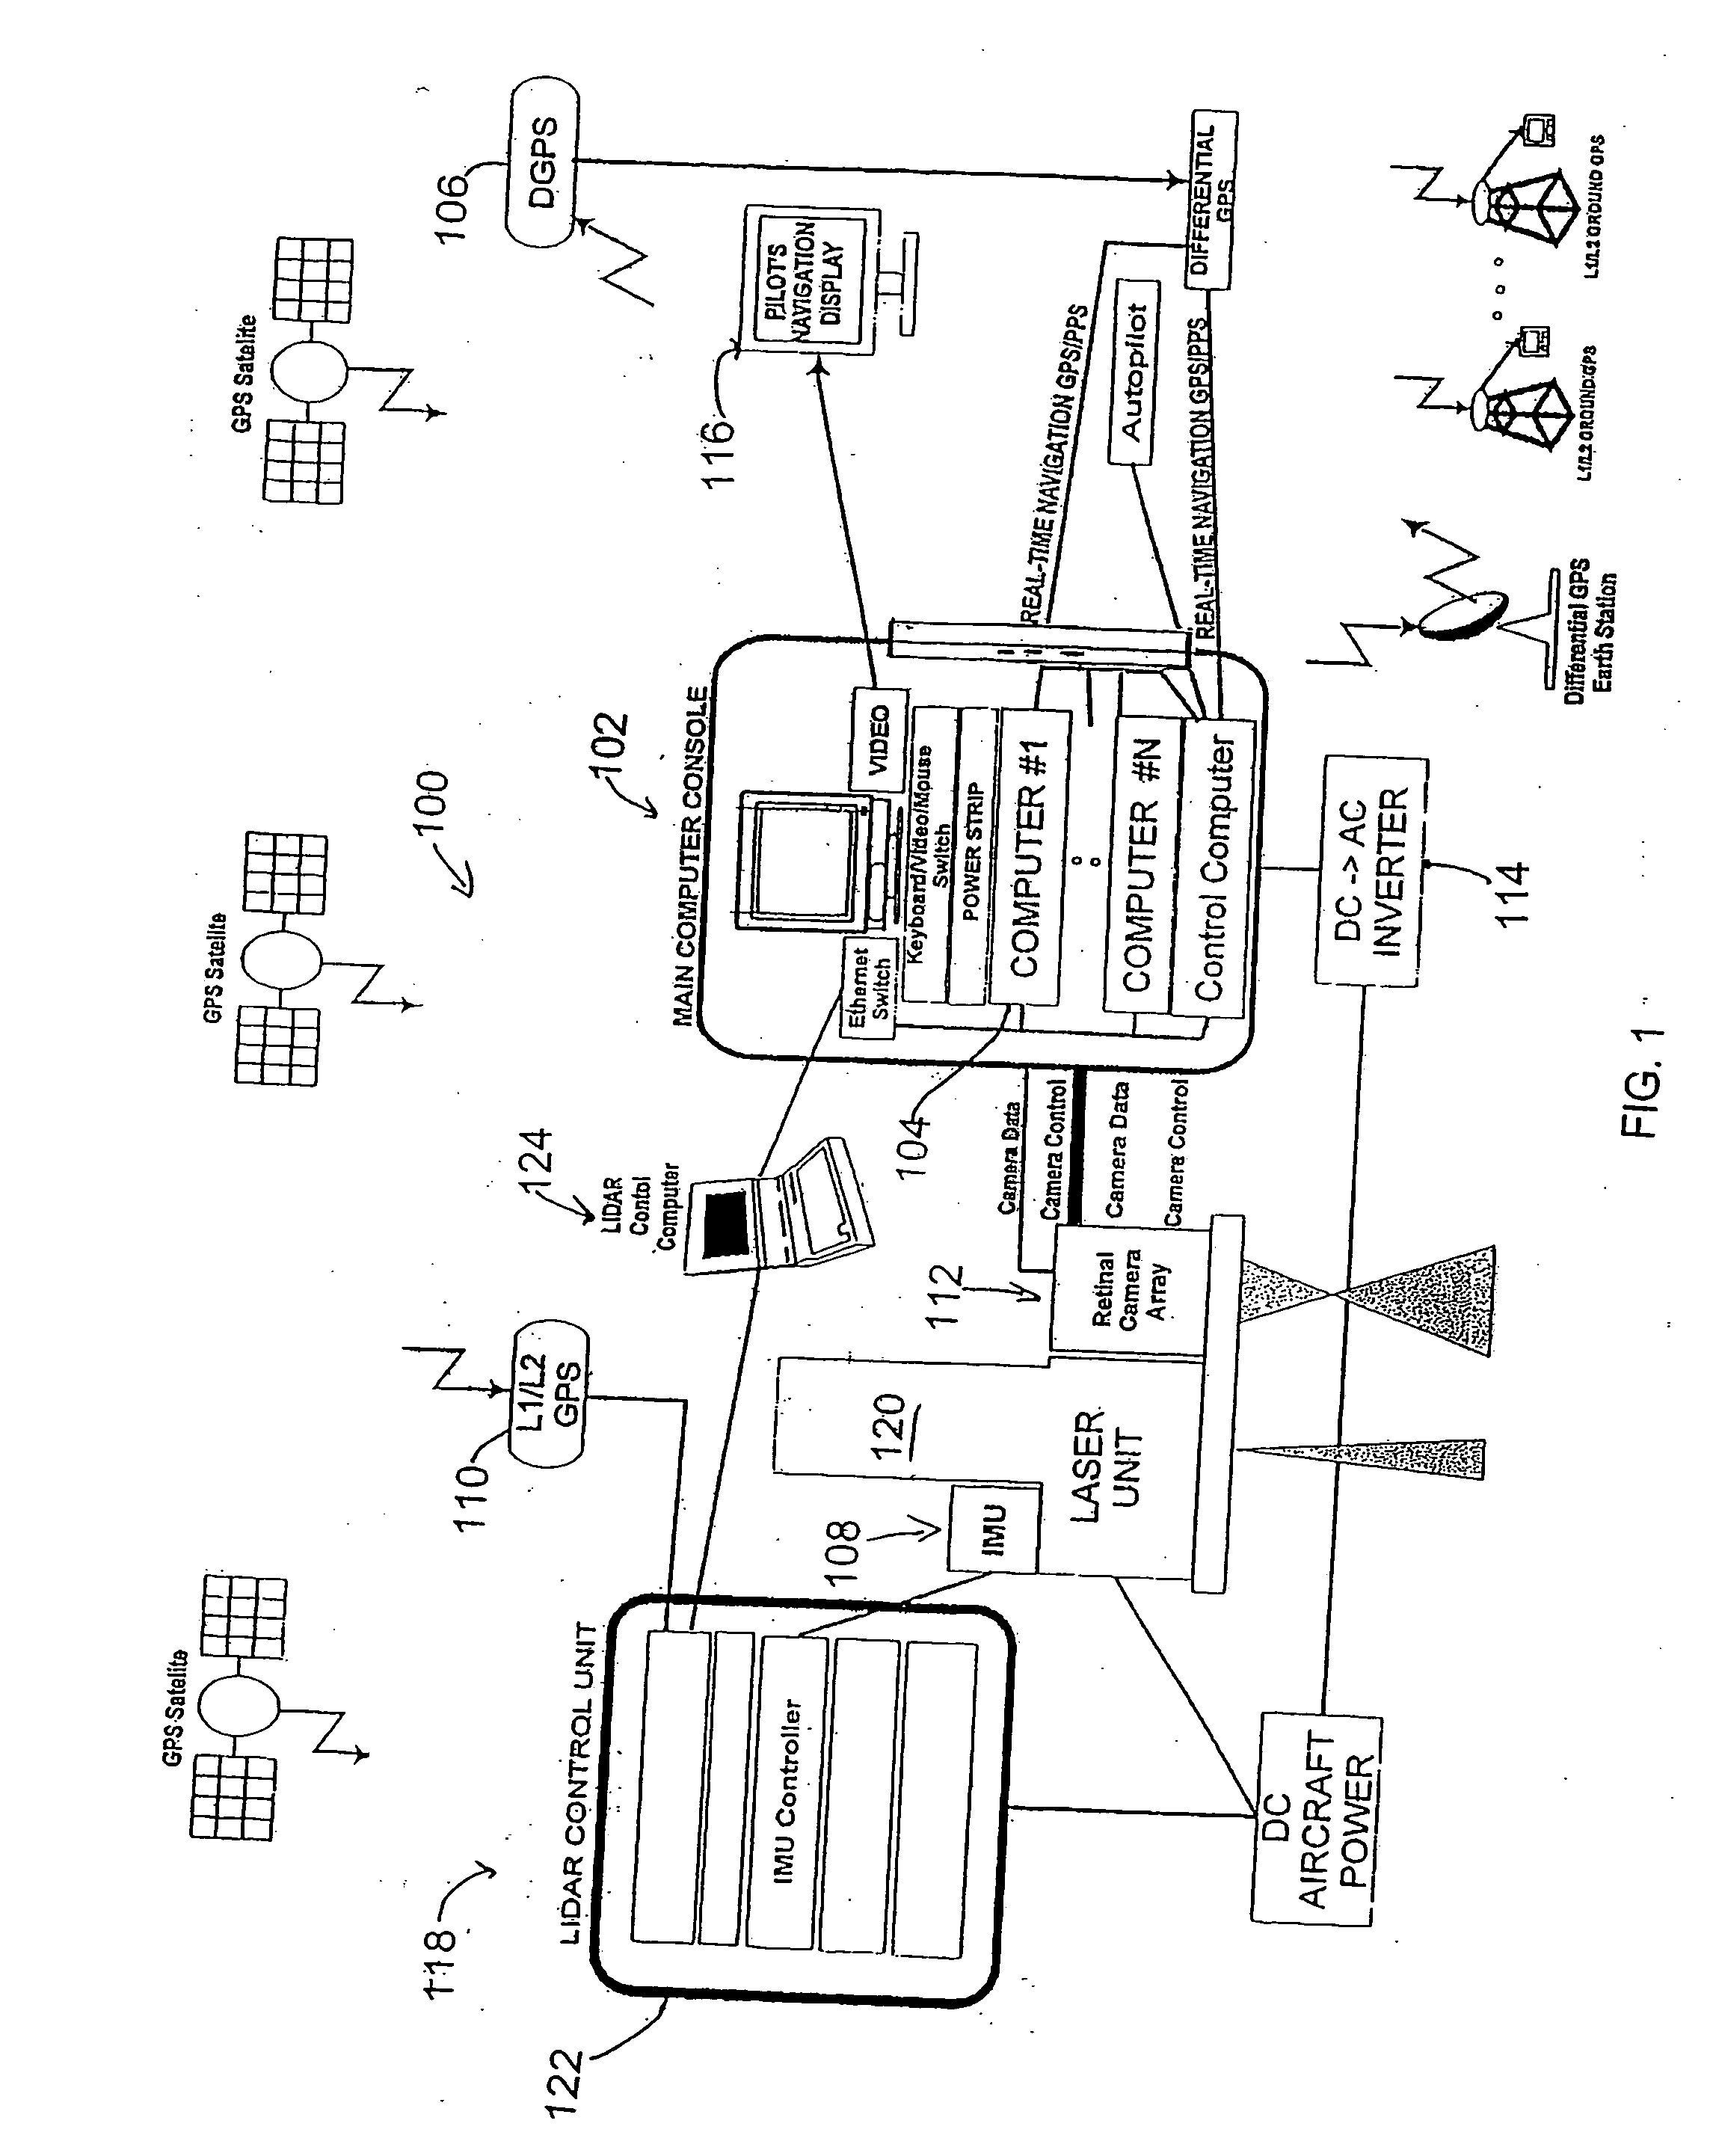 Vehicle based data collection and processing system and imaging sensor system and methods thereof